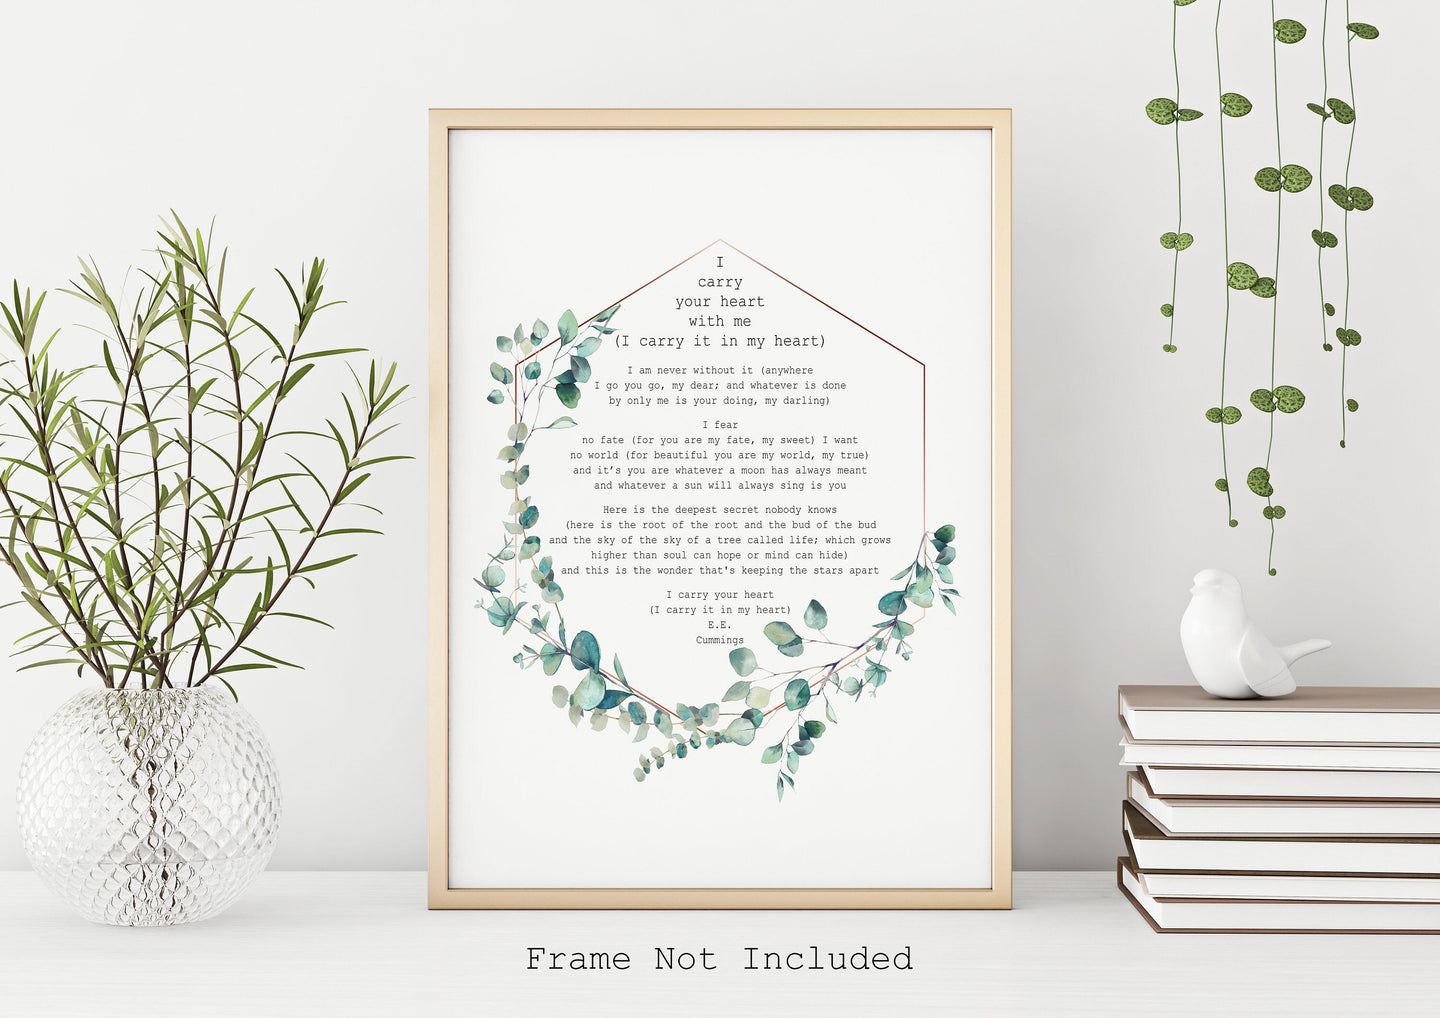 E.E. Cummings Poem I carry your heart (I carry it in my heart) Art Print Home Decor poetry wall art - Framed And Unframed Options